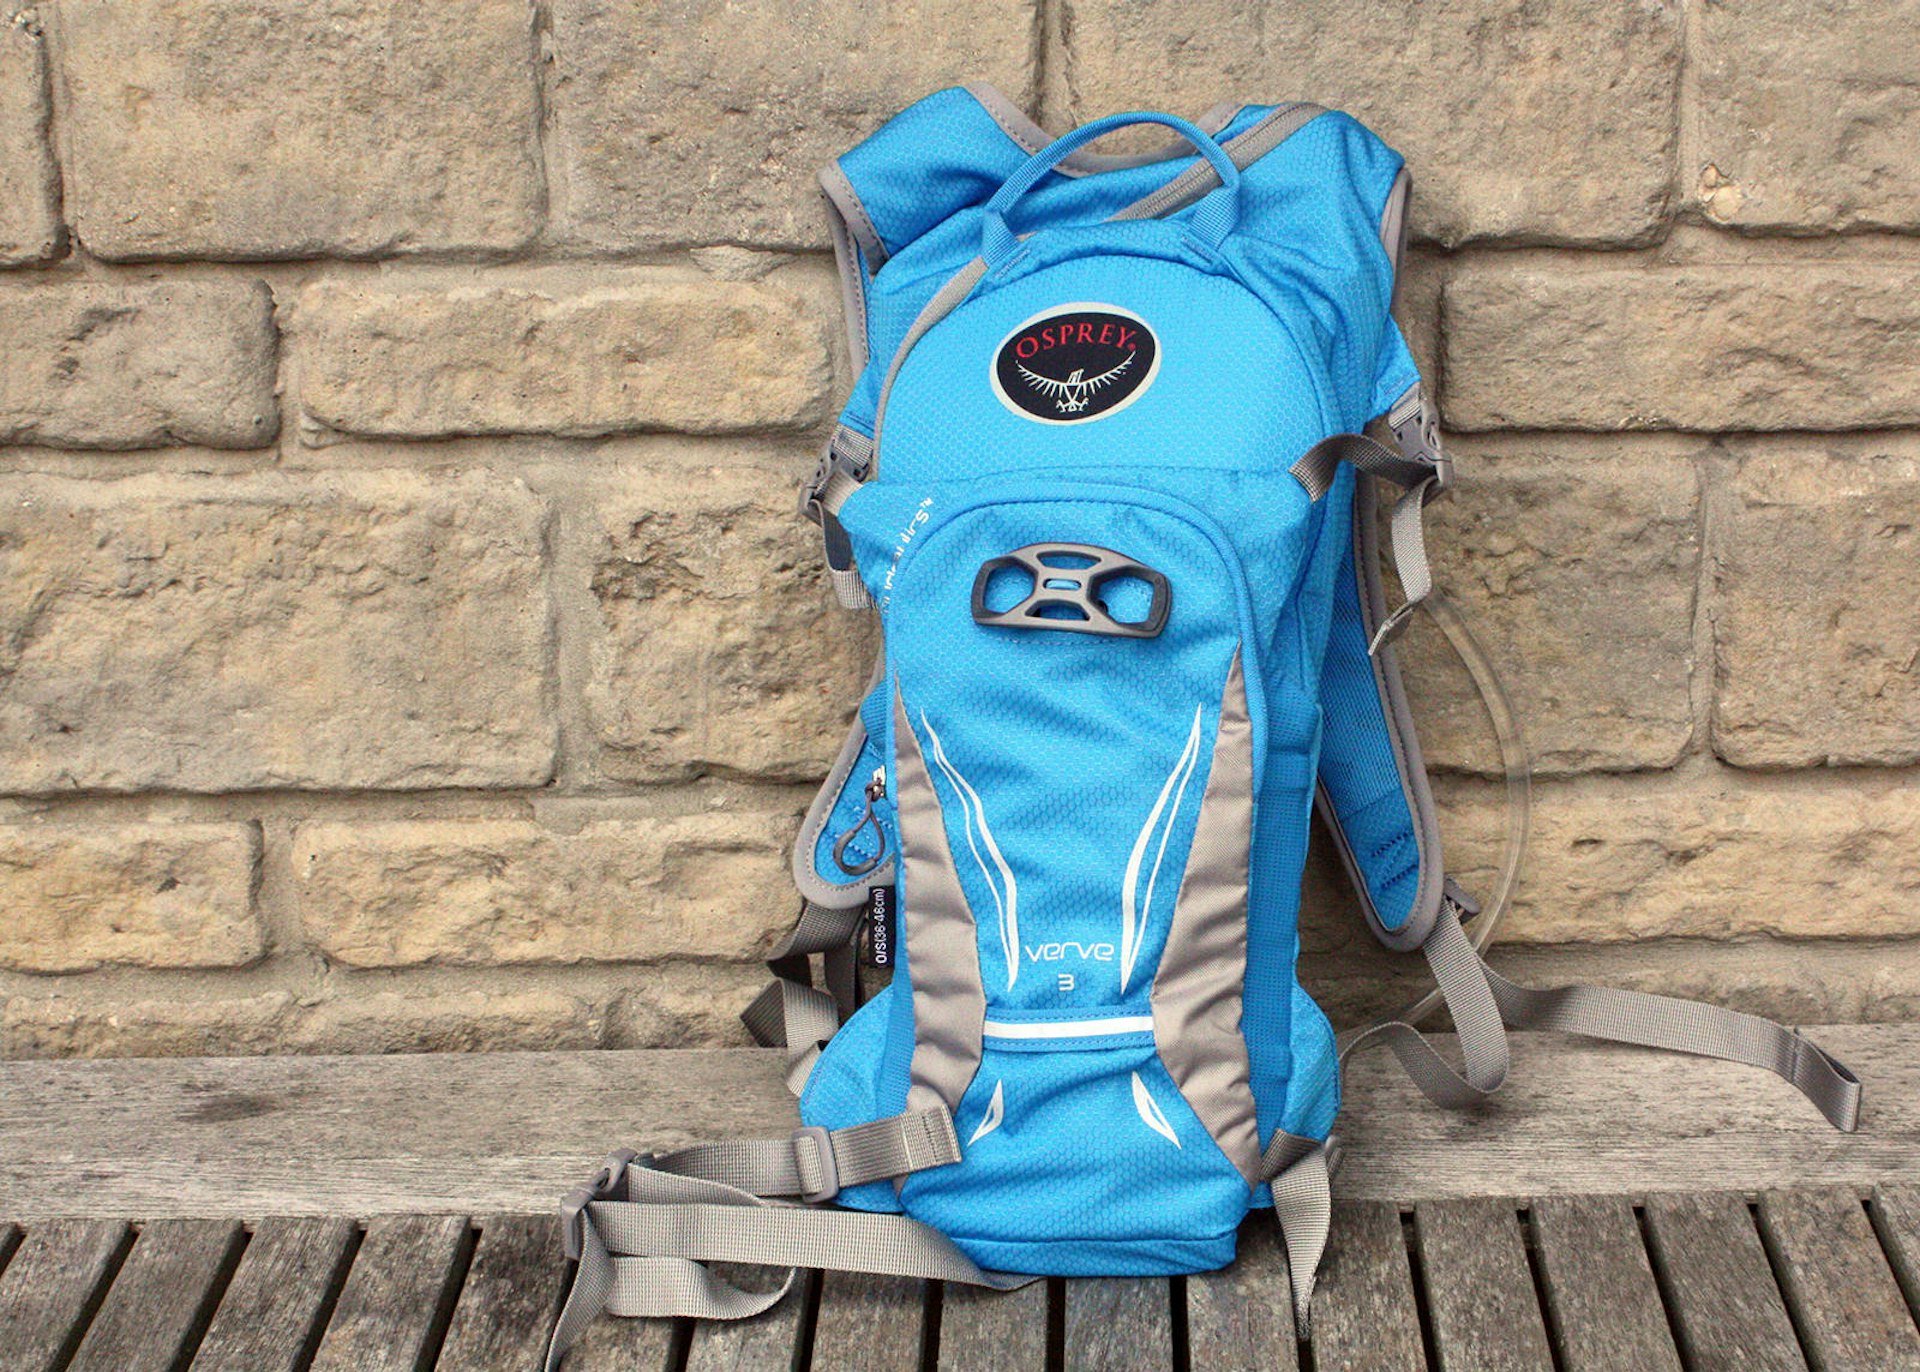 The Osprey Verve 3 has a slim fit and many handy features © David Else / Lonely Planet